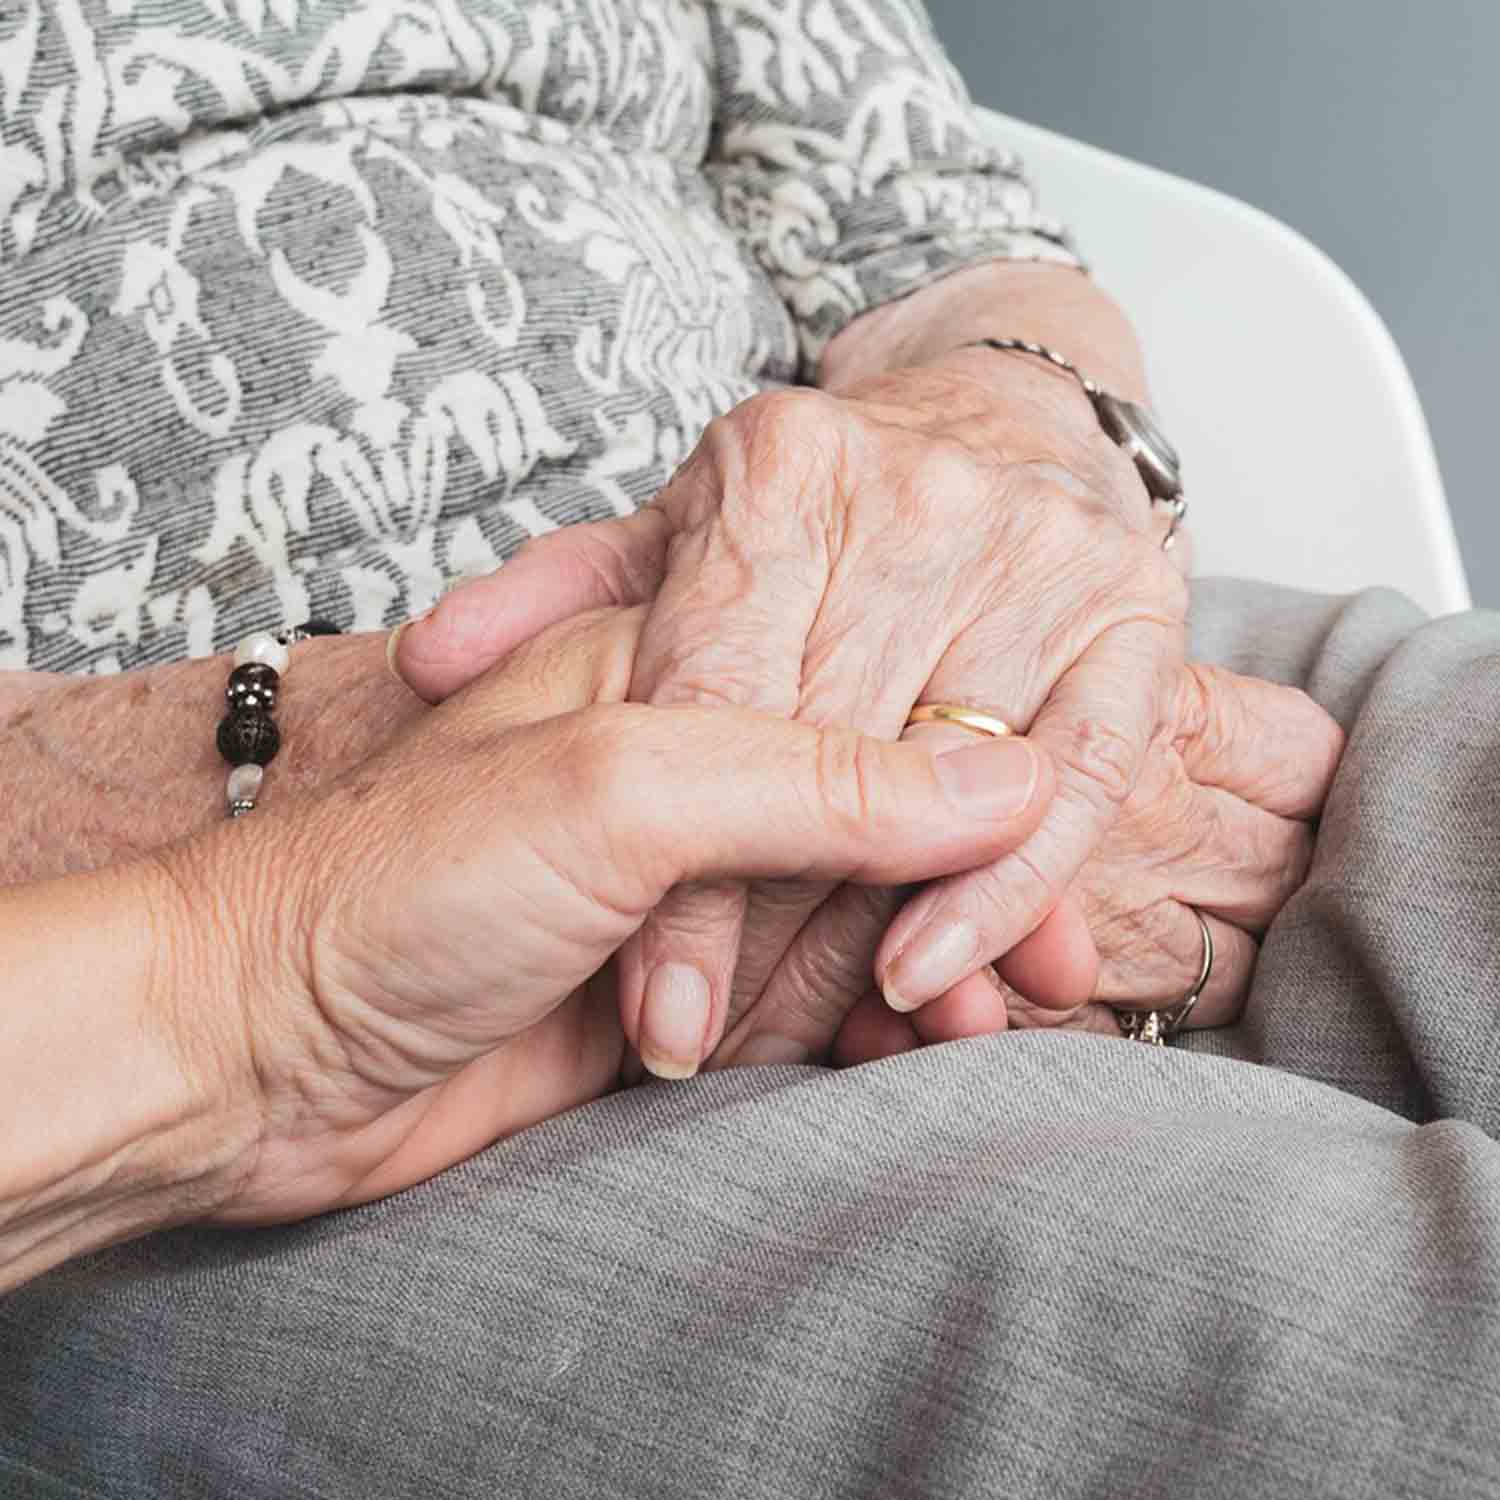 Close up photograph of an elderly person holding a younger individual's hand.